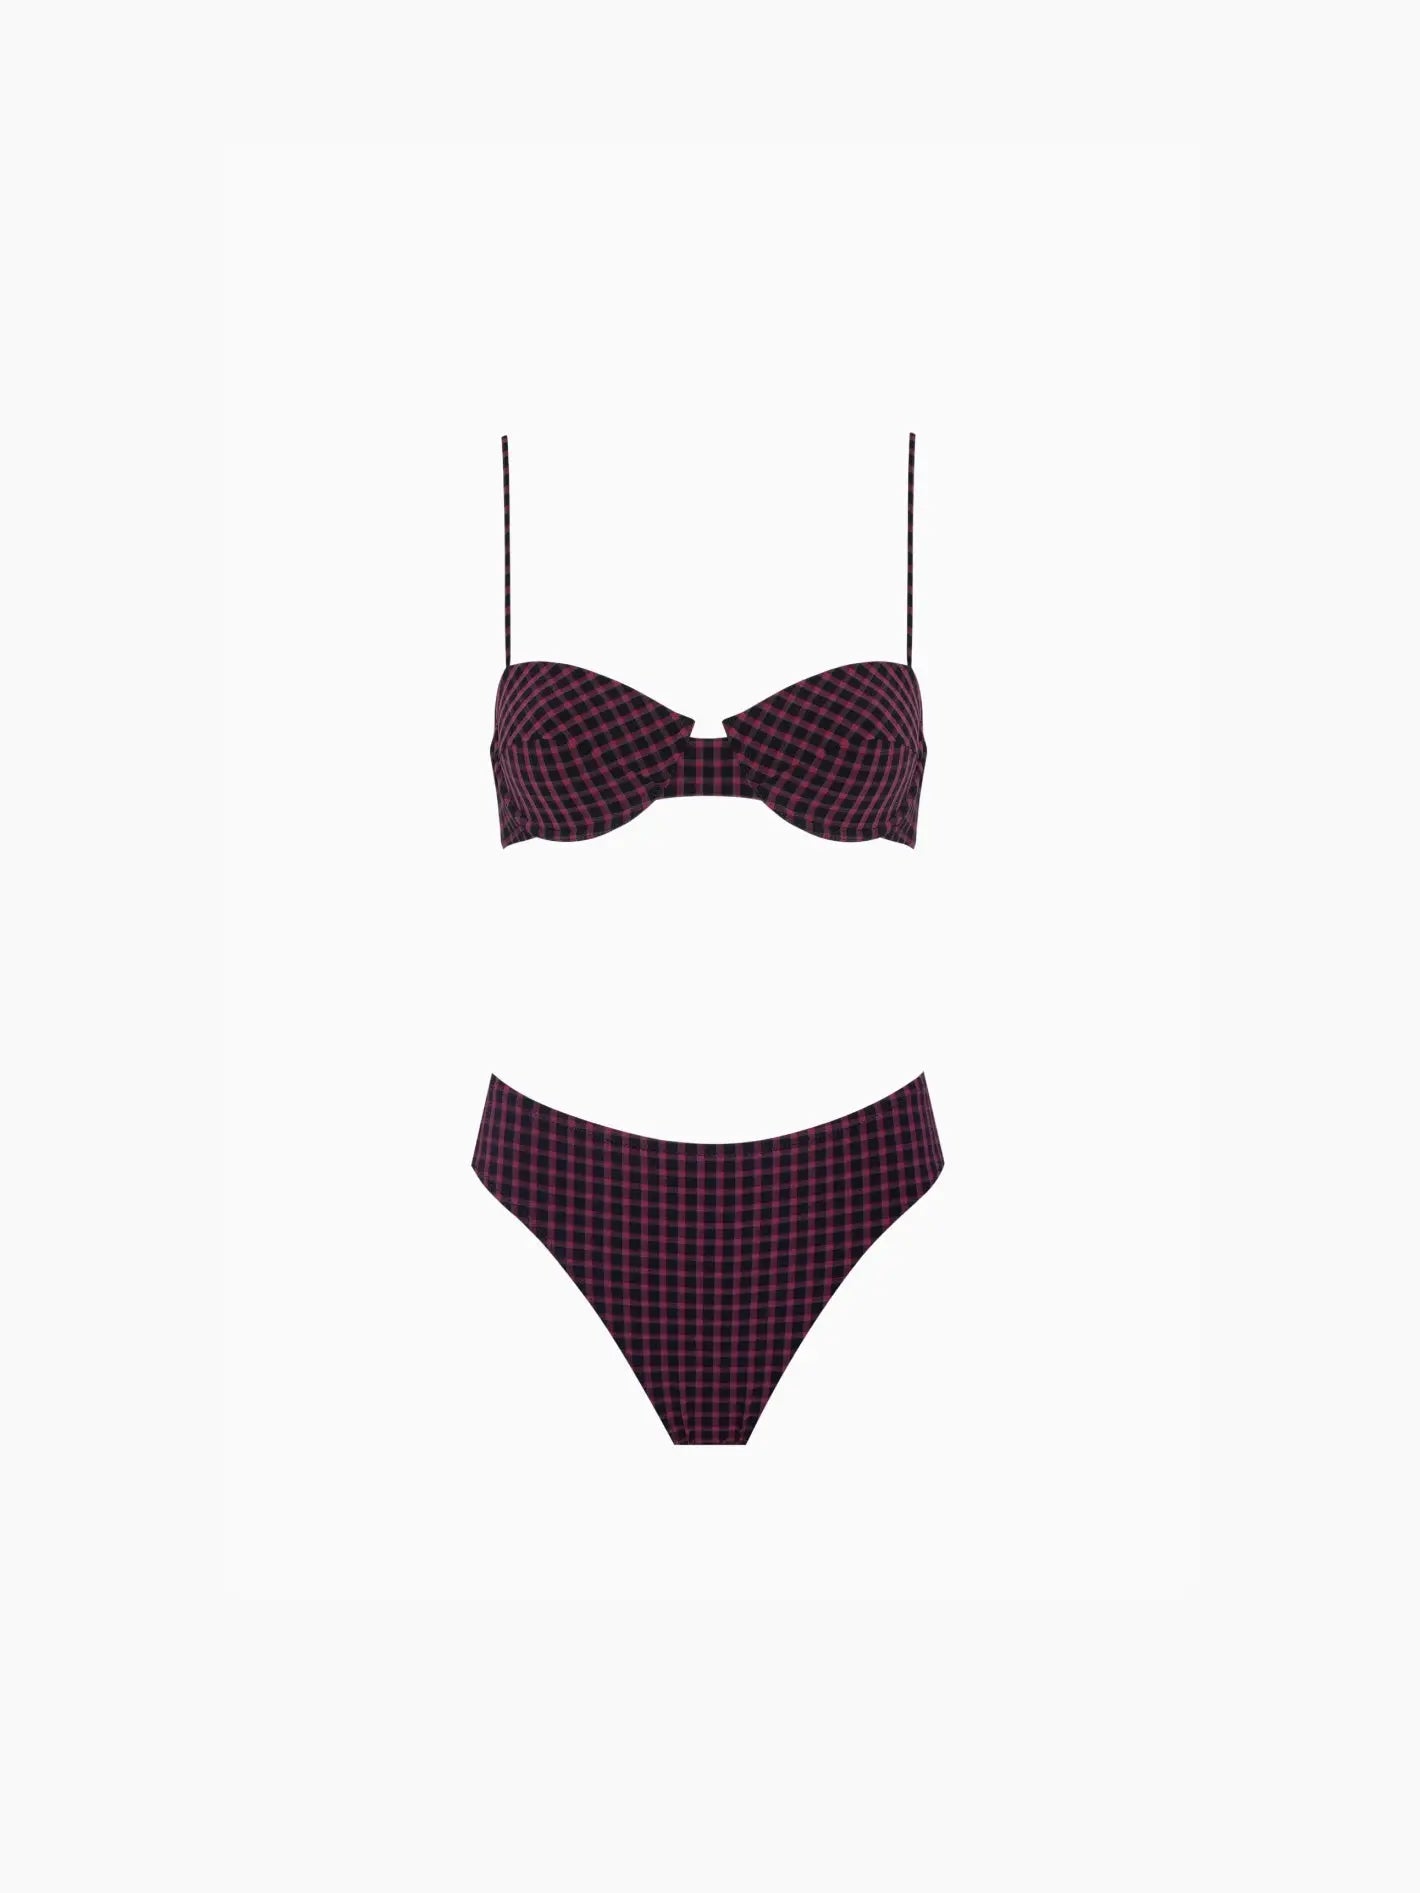 A chic Cleo Bikini Violet with a purple and black checkered pattern, exclusively available at Bassalstore in Barcelona. The top features thin spaghetti straps and a small cut-out in the center, while the bottoms showcase a high-cut leg design. The swimsuit is displayed against a plain white background by Pale.